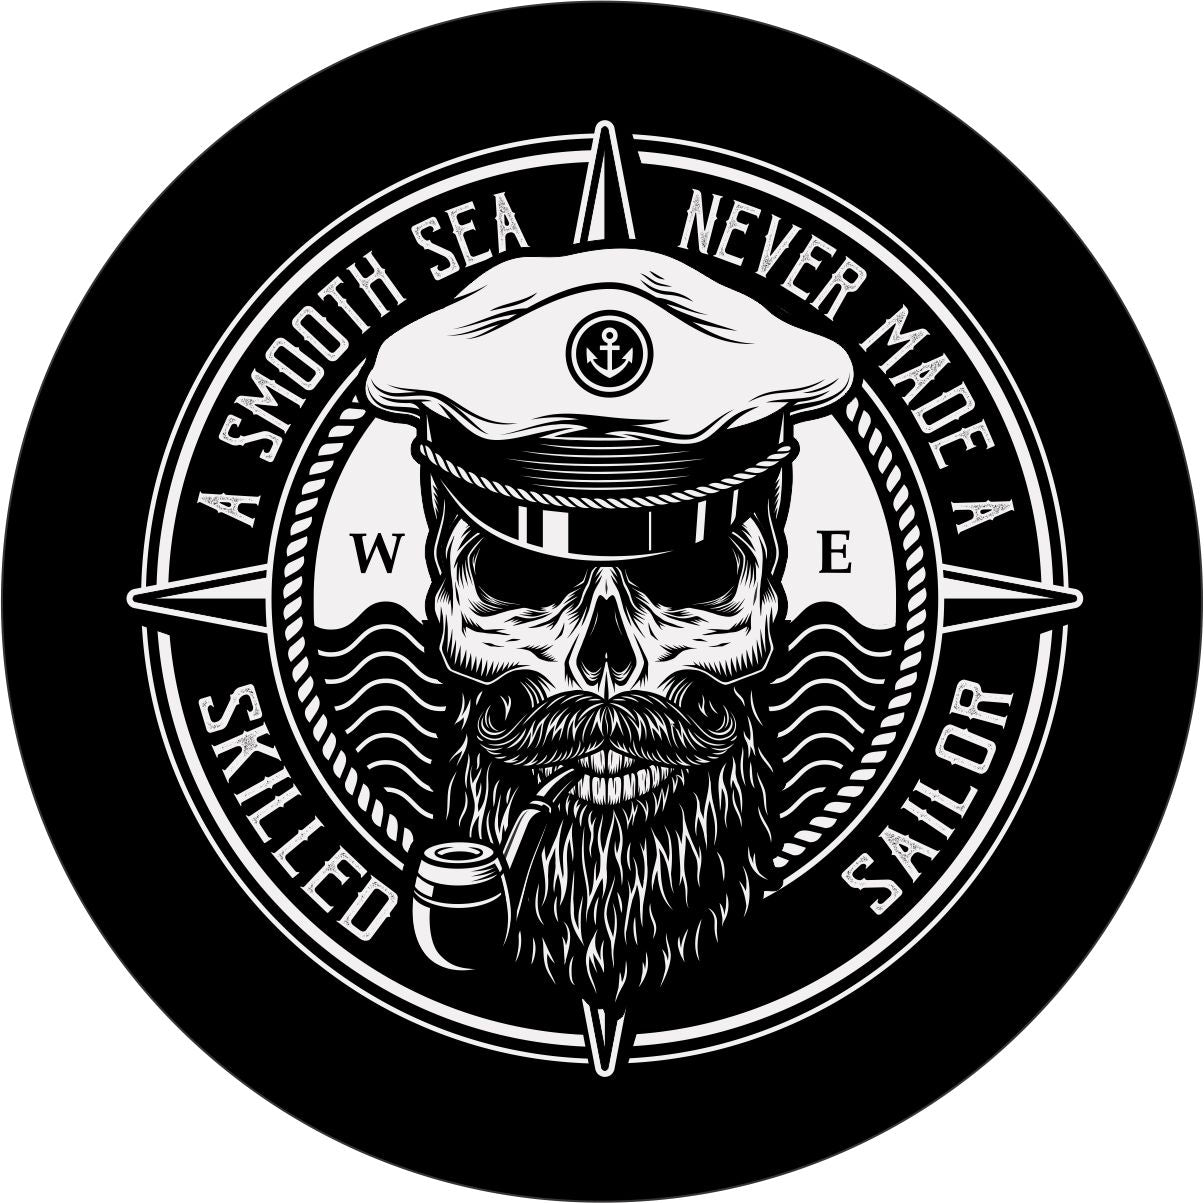 Unique spare tire cover design with a skull wearing a captains hat smoking a pipe and a compass style background with the saying a smooth sea never made a skilled sailor on the edge. Custom wheel cover that's made to order for any make and model vehicle.